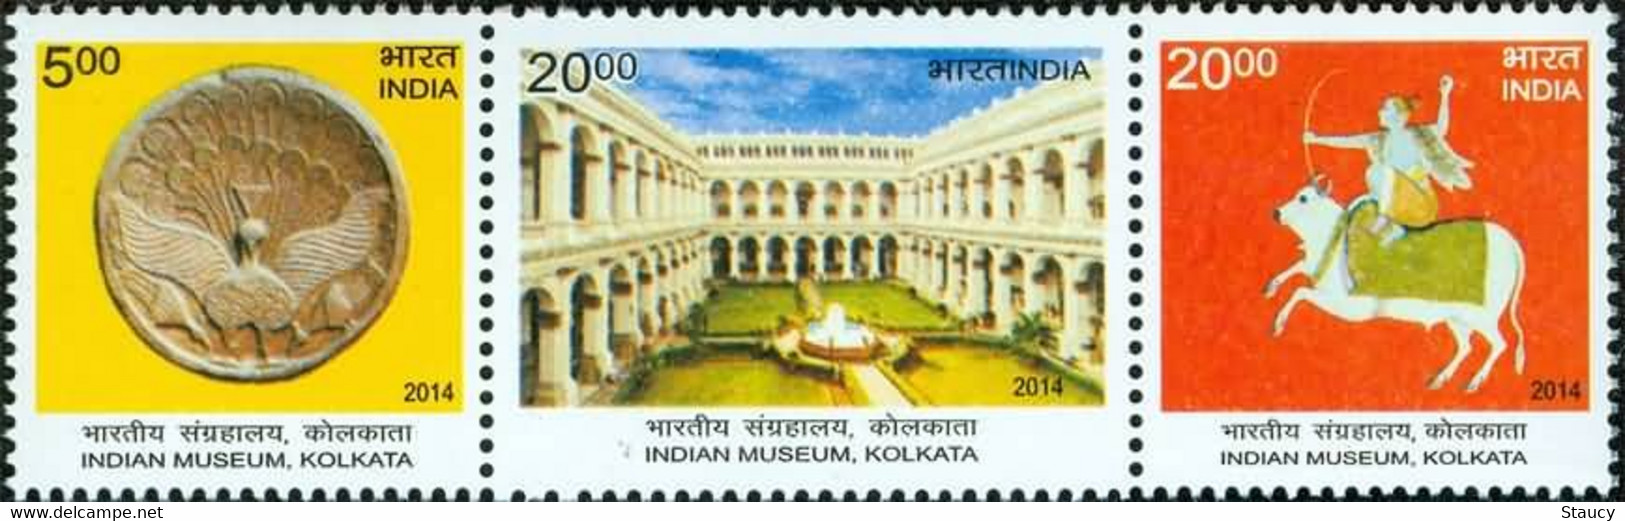 INDIA 2014 200 YEARS OF INDIAN MUSEUM KOLKATA 3v SET MNH (Archelogy, Art, Painting, History) As Per Scan - Incisioni